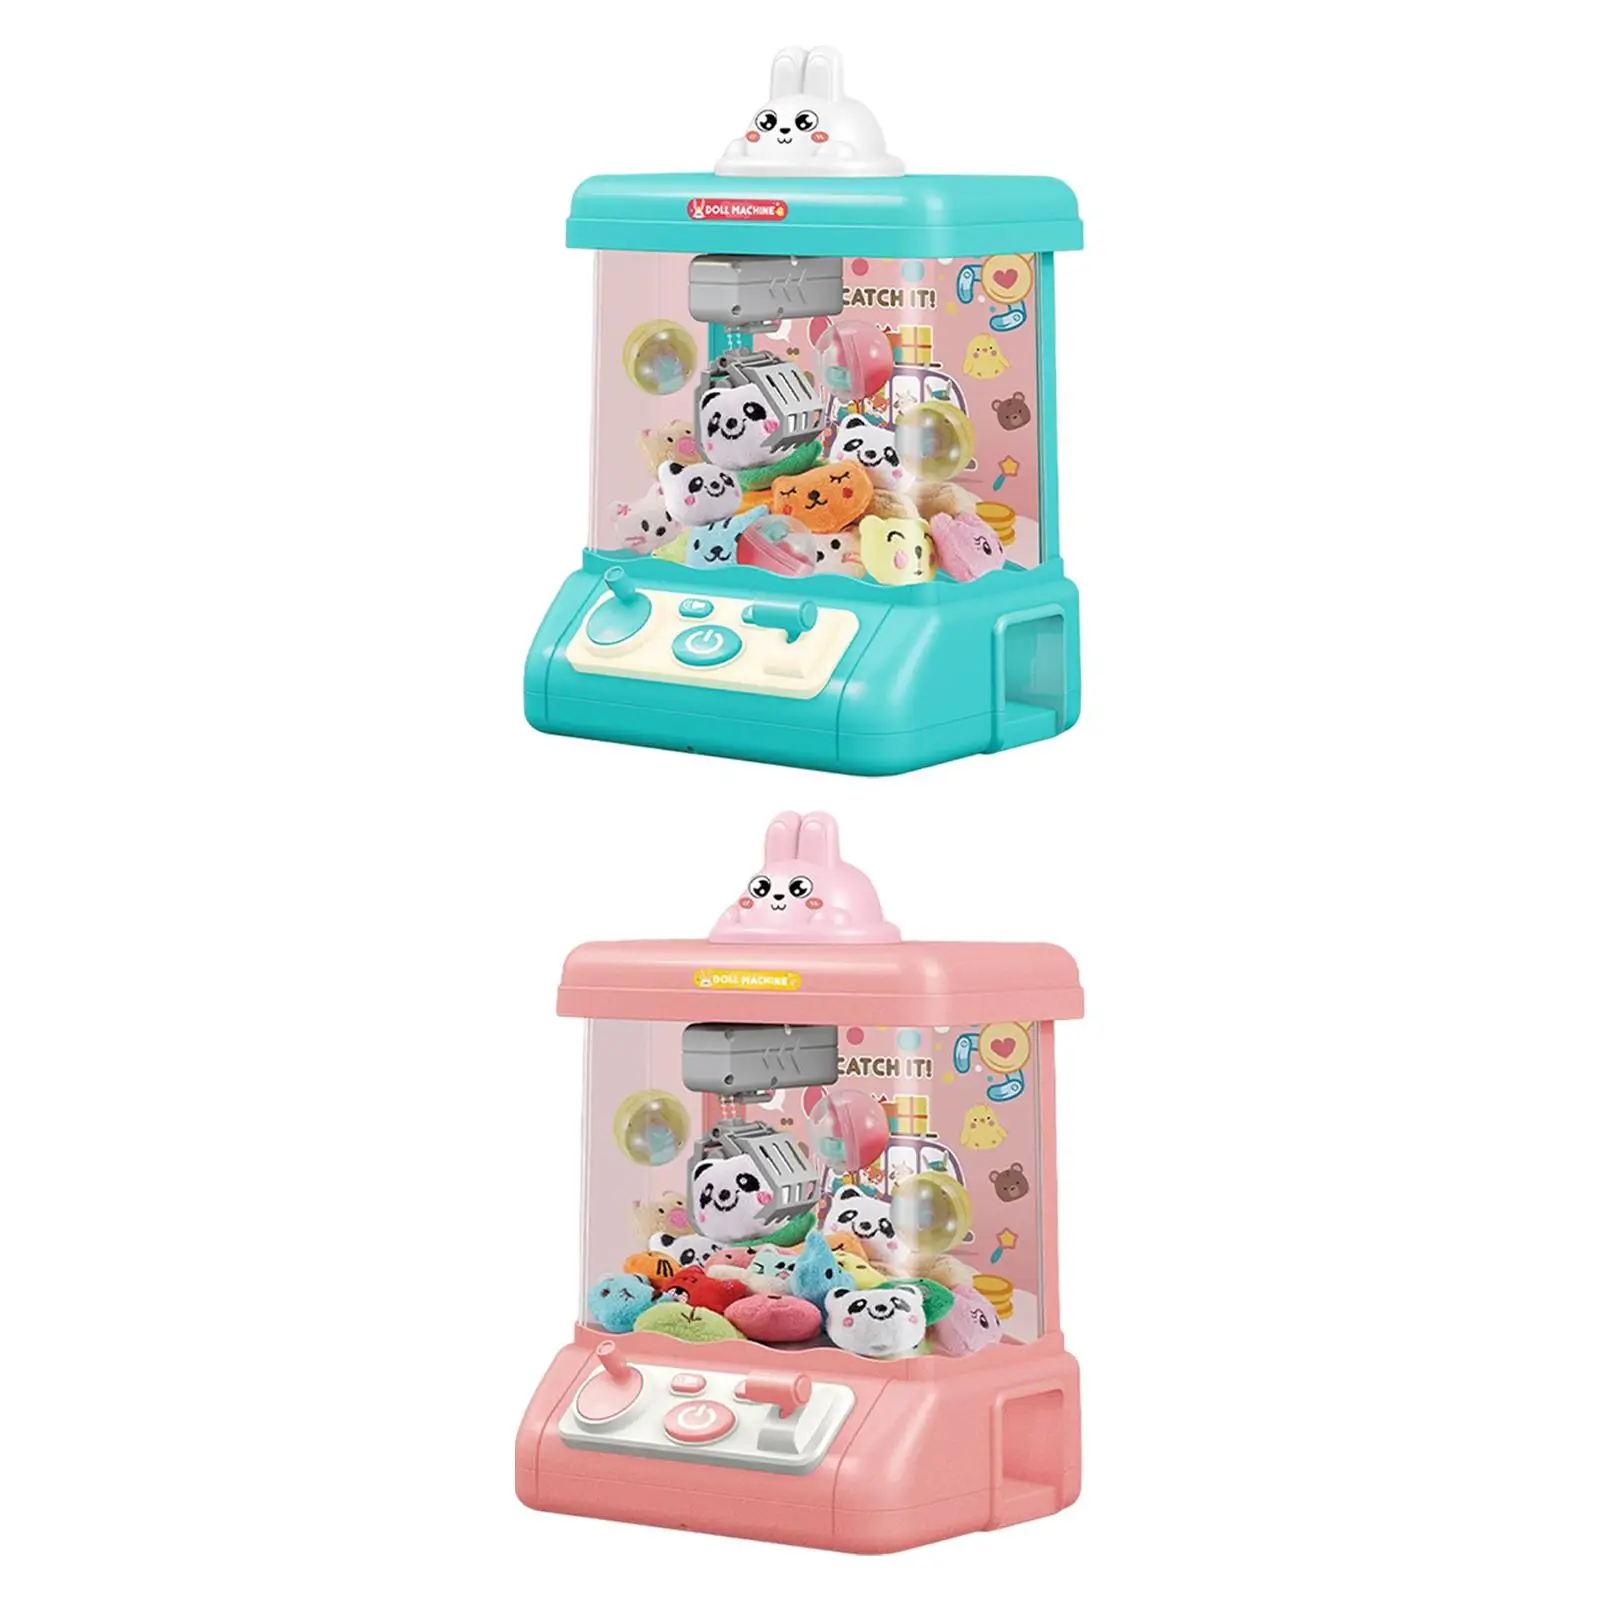 Kids Claw Machine with Lights Sound Arcade Game Electronic Small Catching Doll Machine Slot Machine Claw Toy for Birthday Gifts